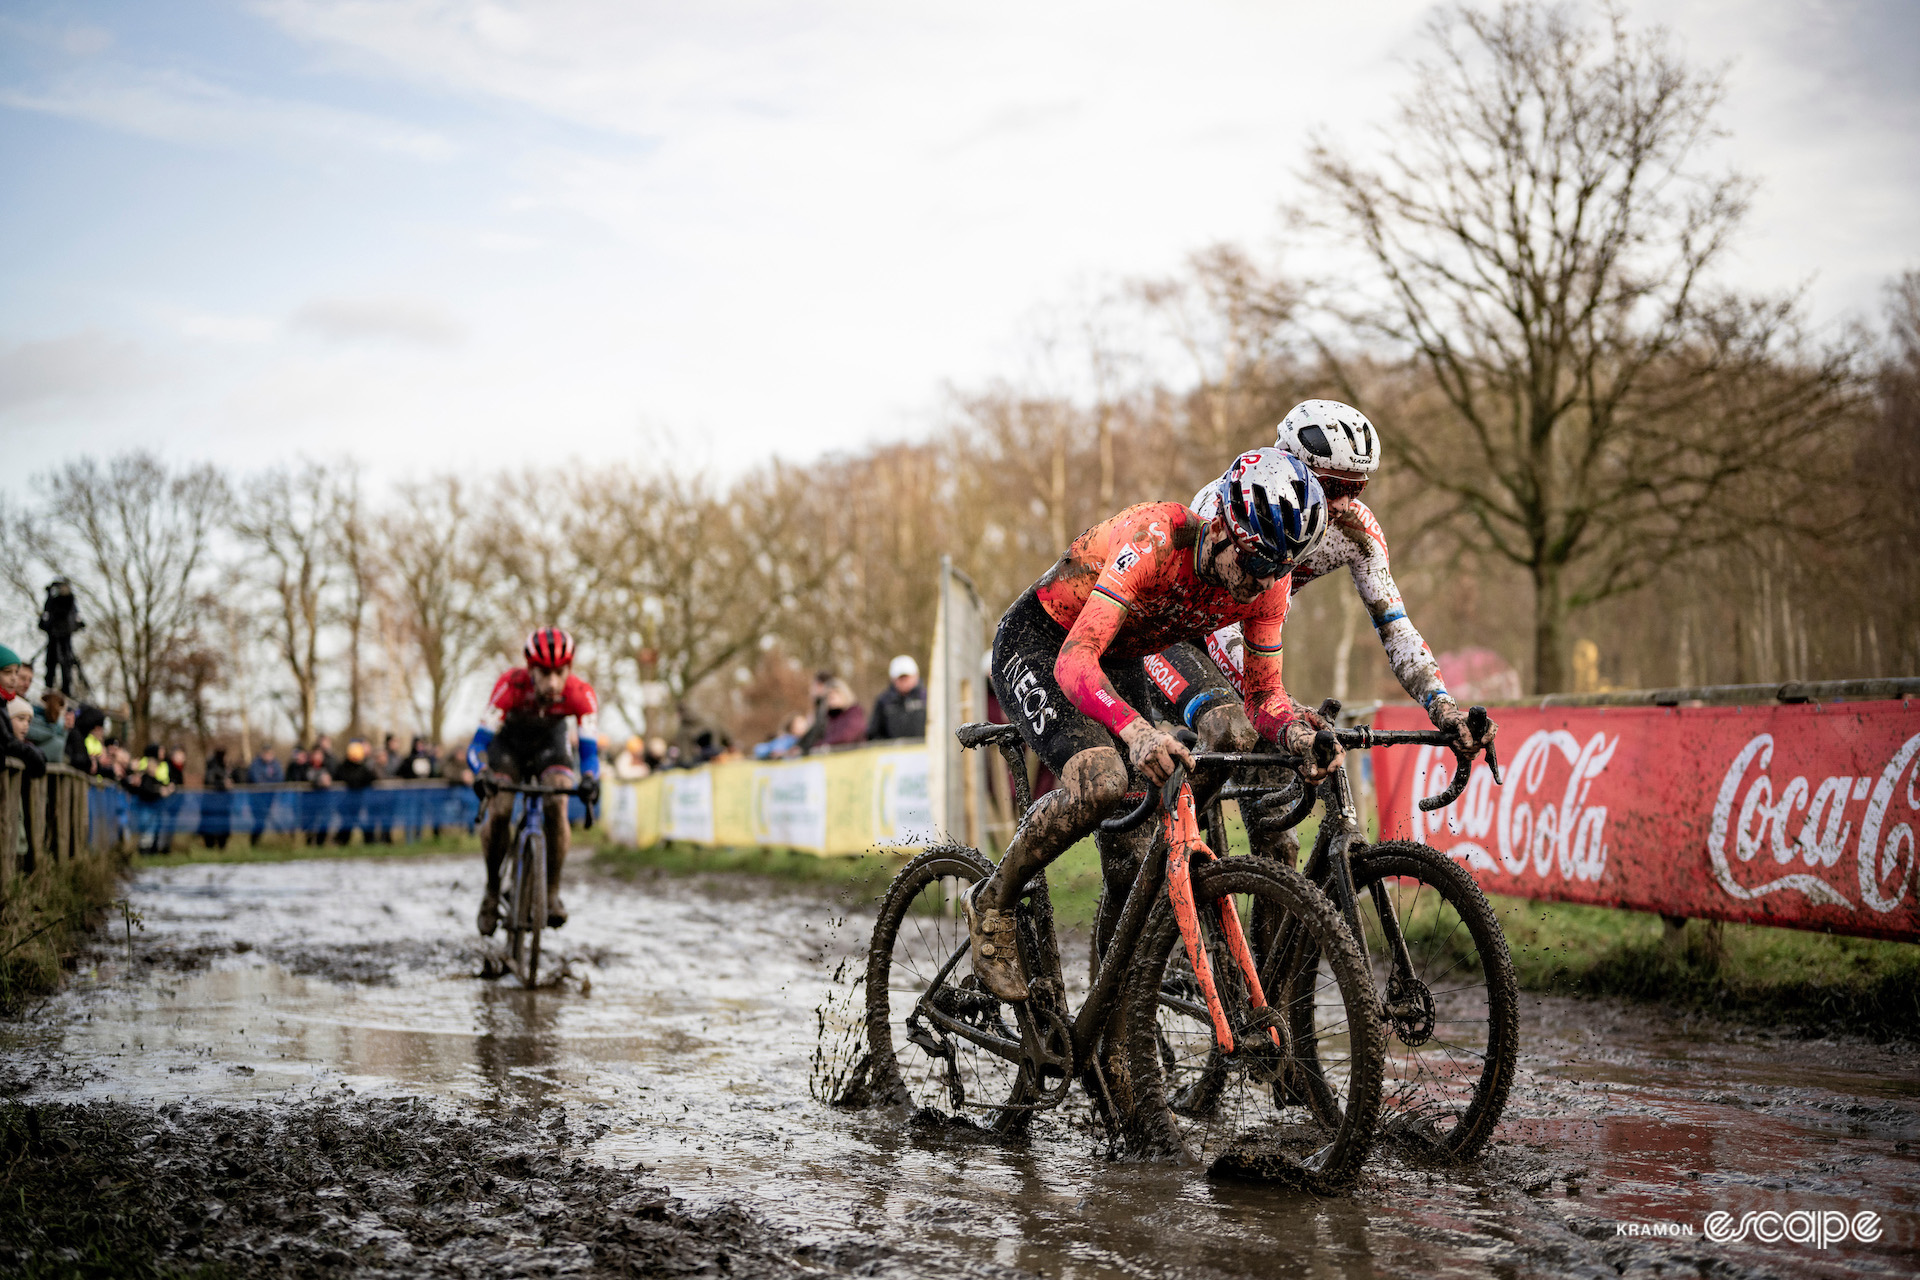 Tom Pidcock clashes with Michael Vanthourenhout in a particularly muddy section during the GP Sven Nys, X2O Trofee Baal.